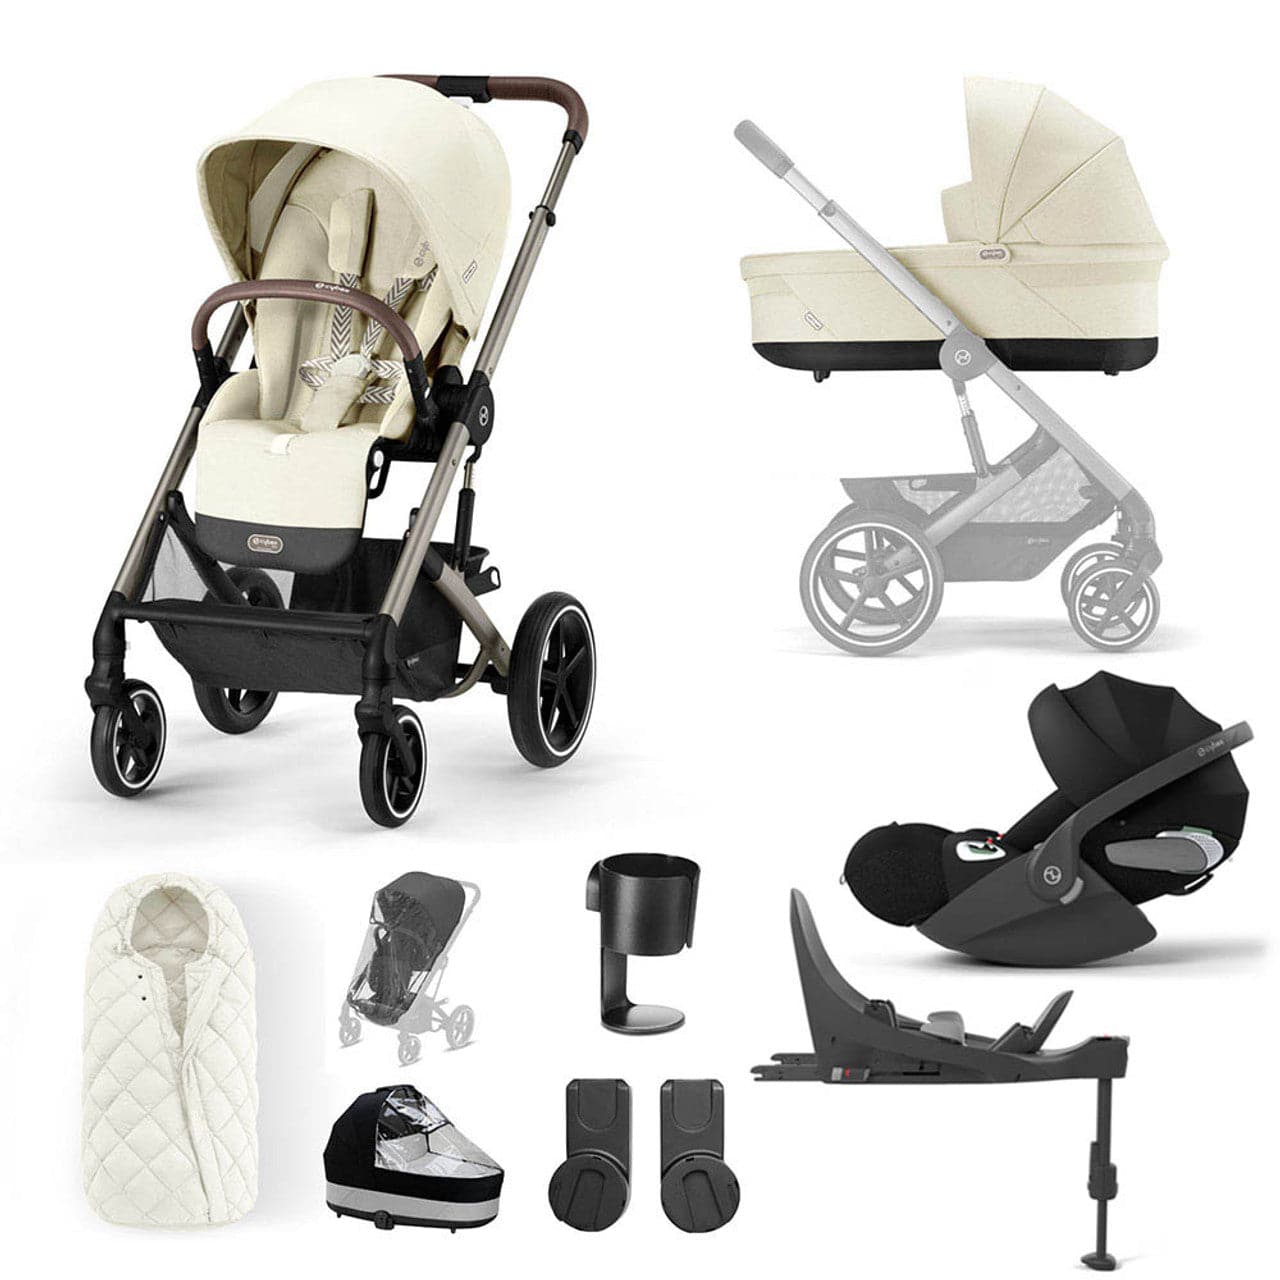 Cybex Balios S Lux 10 Piece Luxury Travel System Bundle- Seashell Beige - For Your Little One